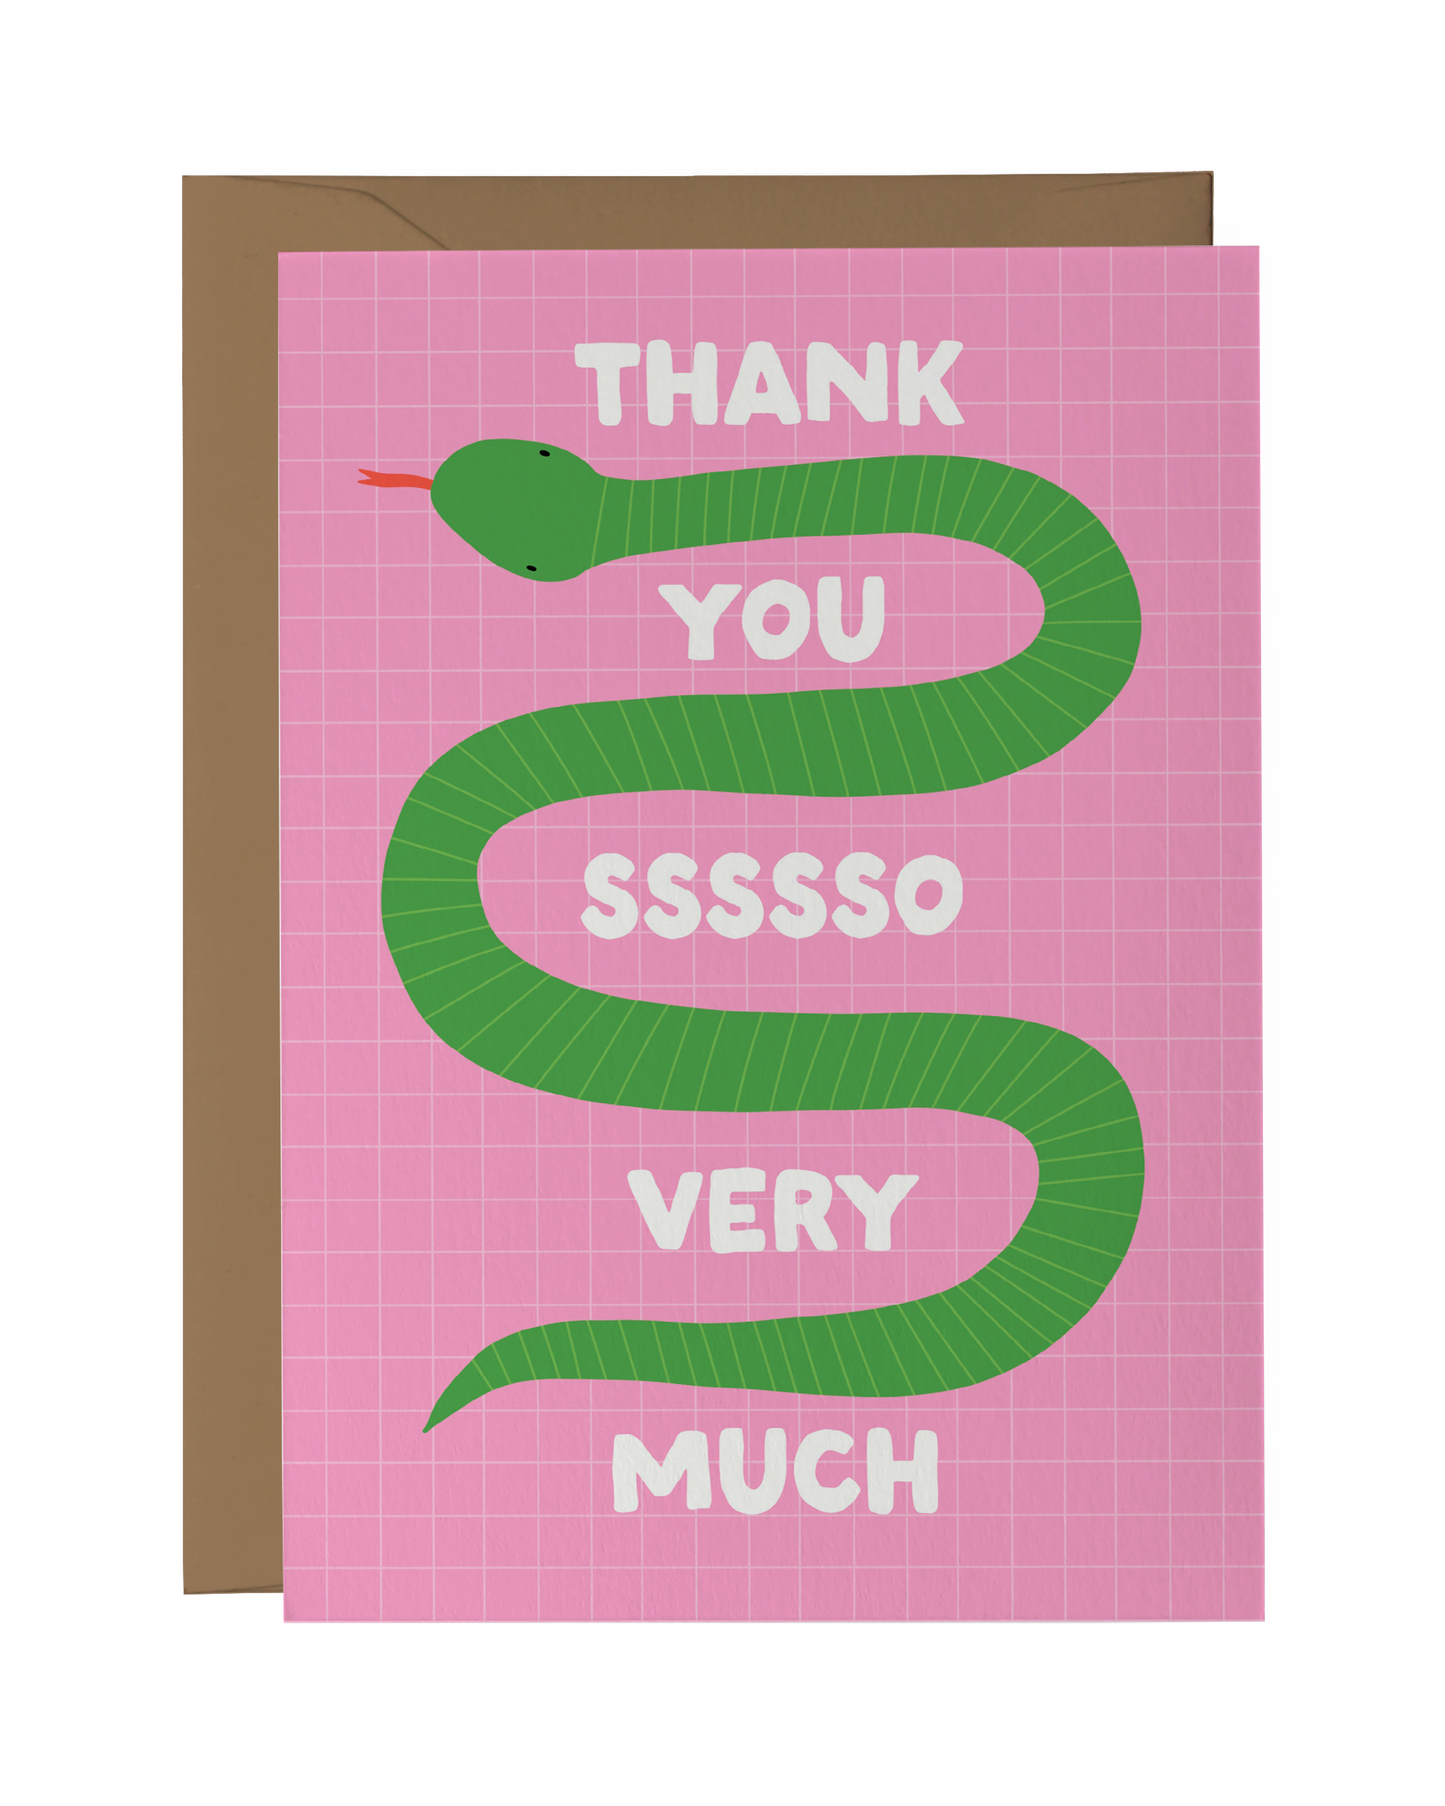 Thank You Ssssso Very Much